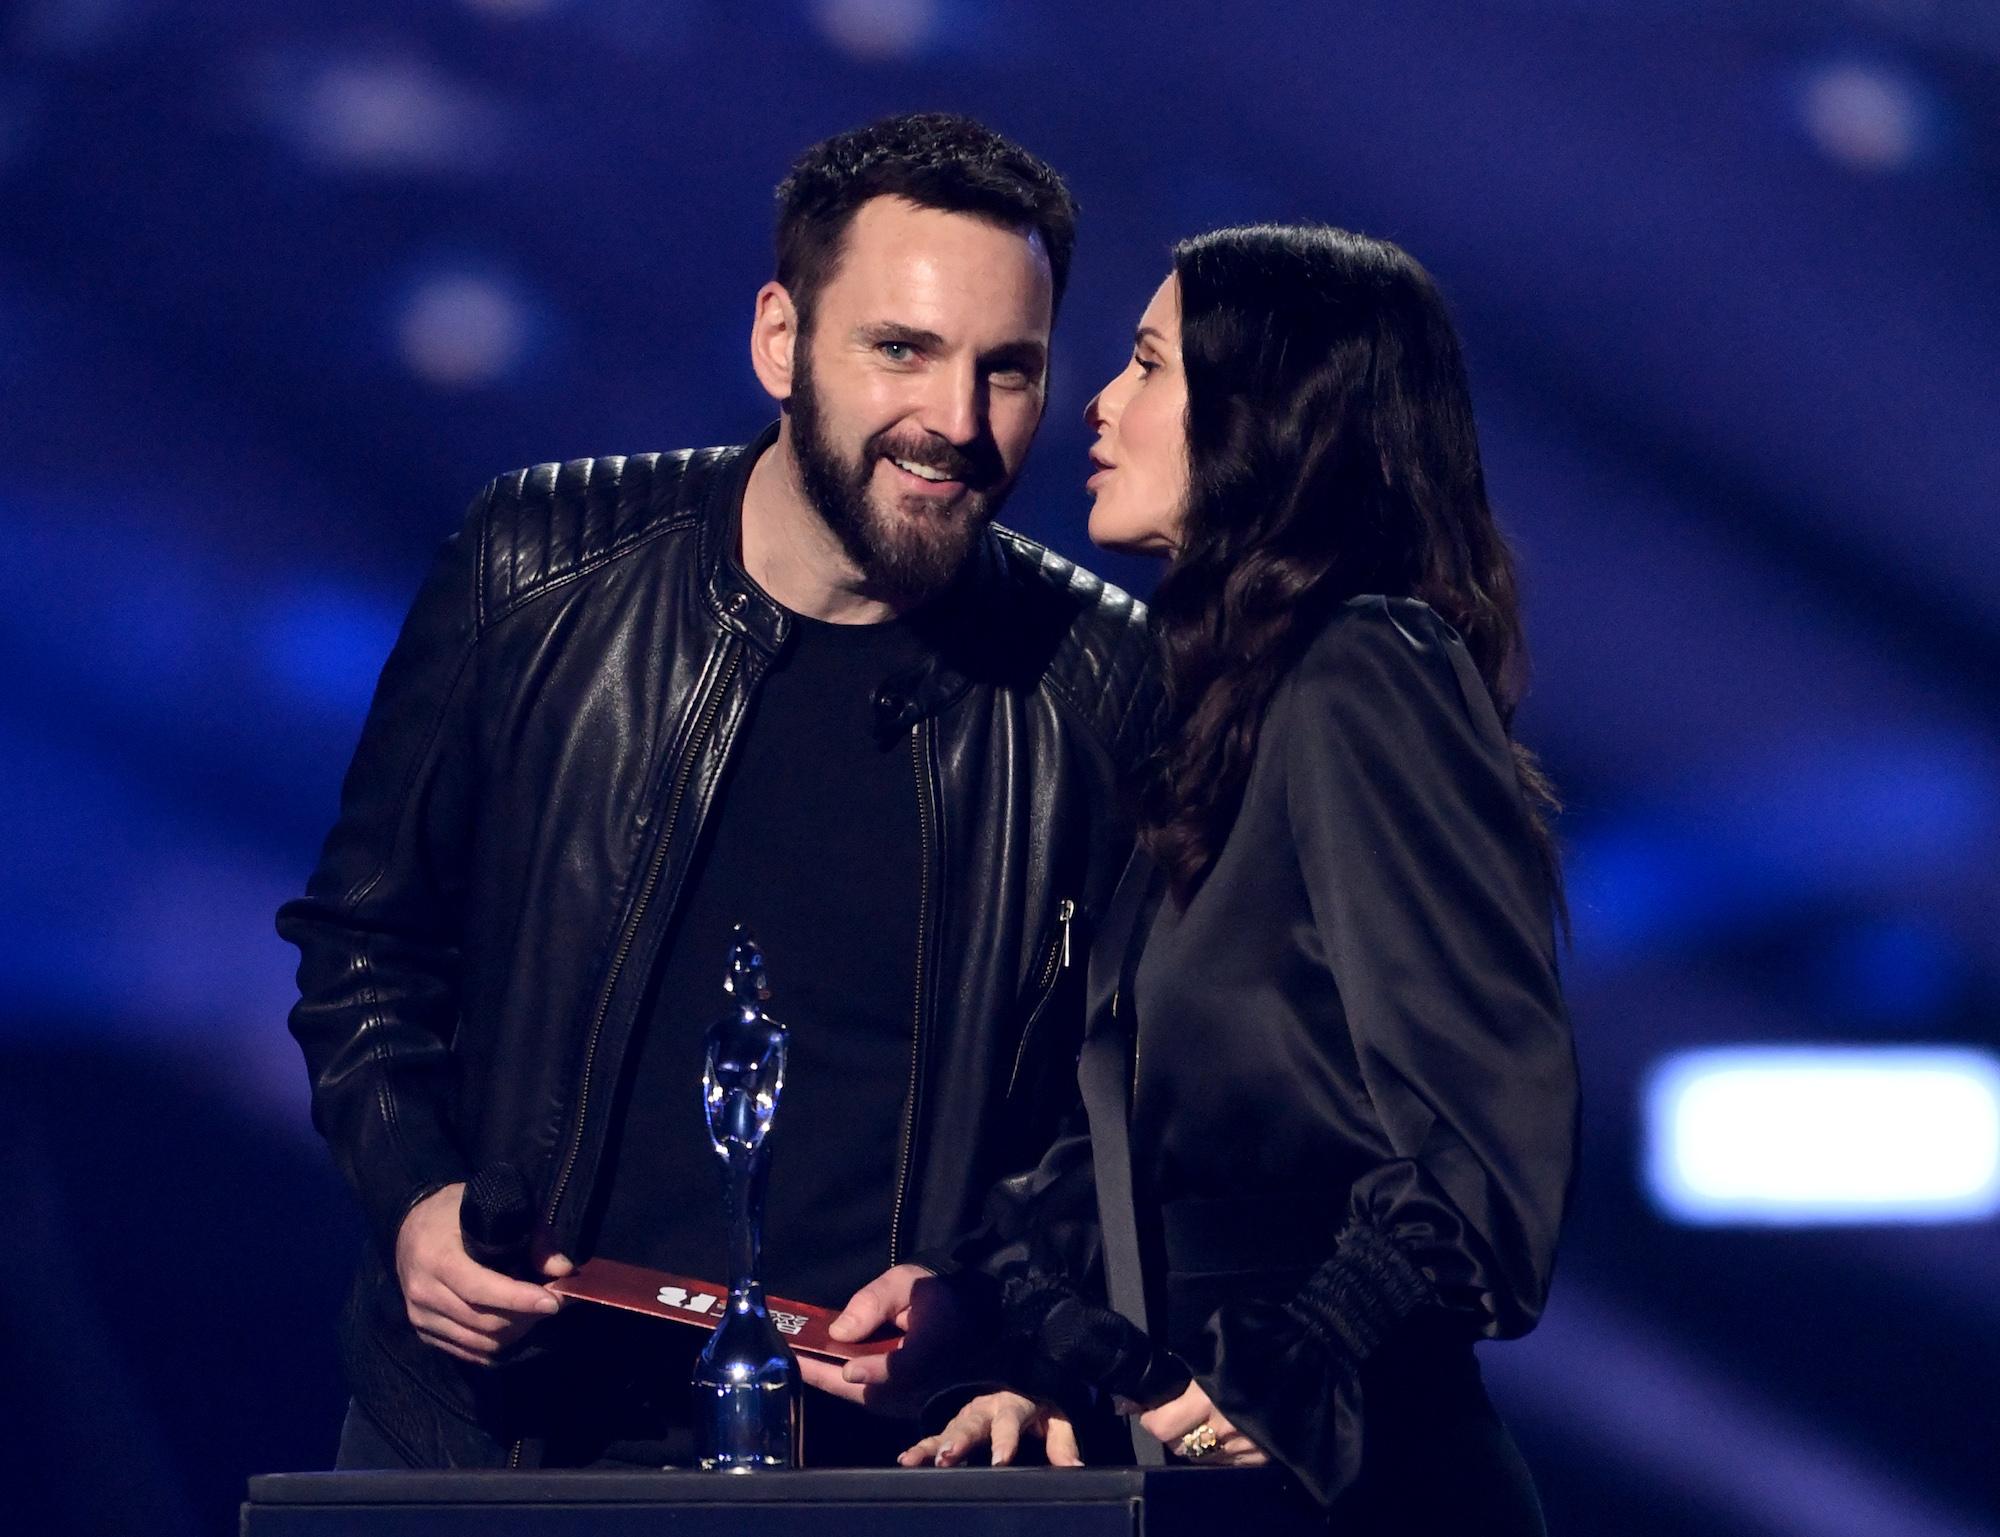 Courteney Cox whispers into Johnny McDaid